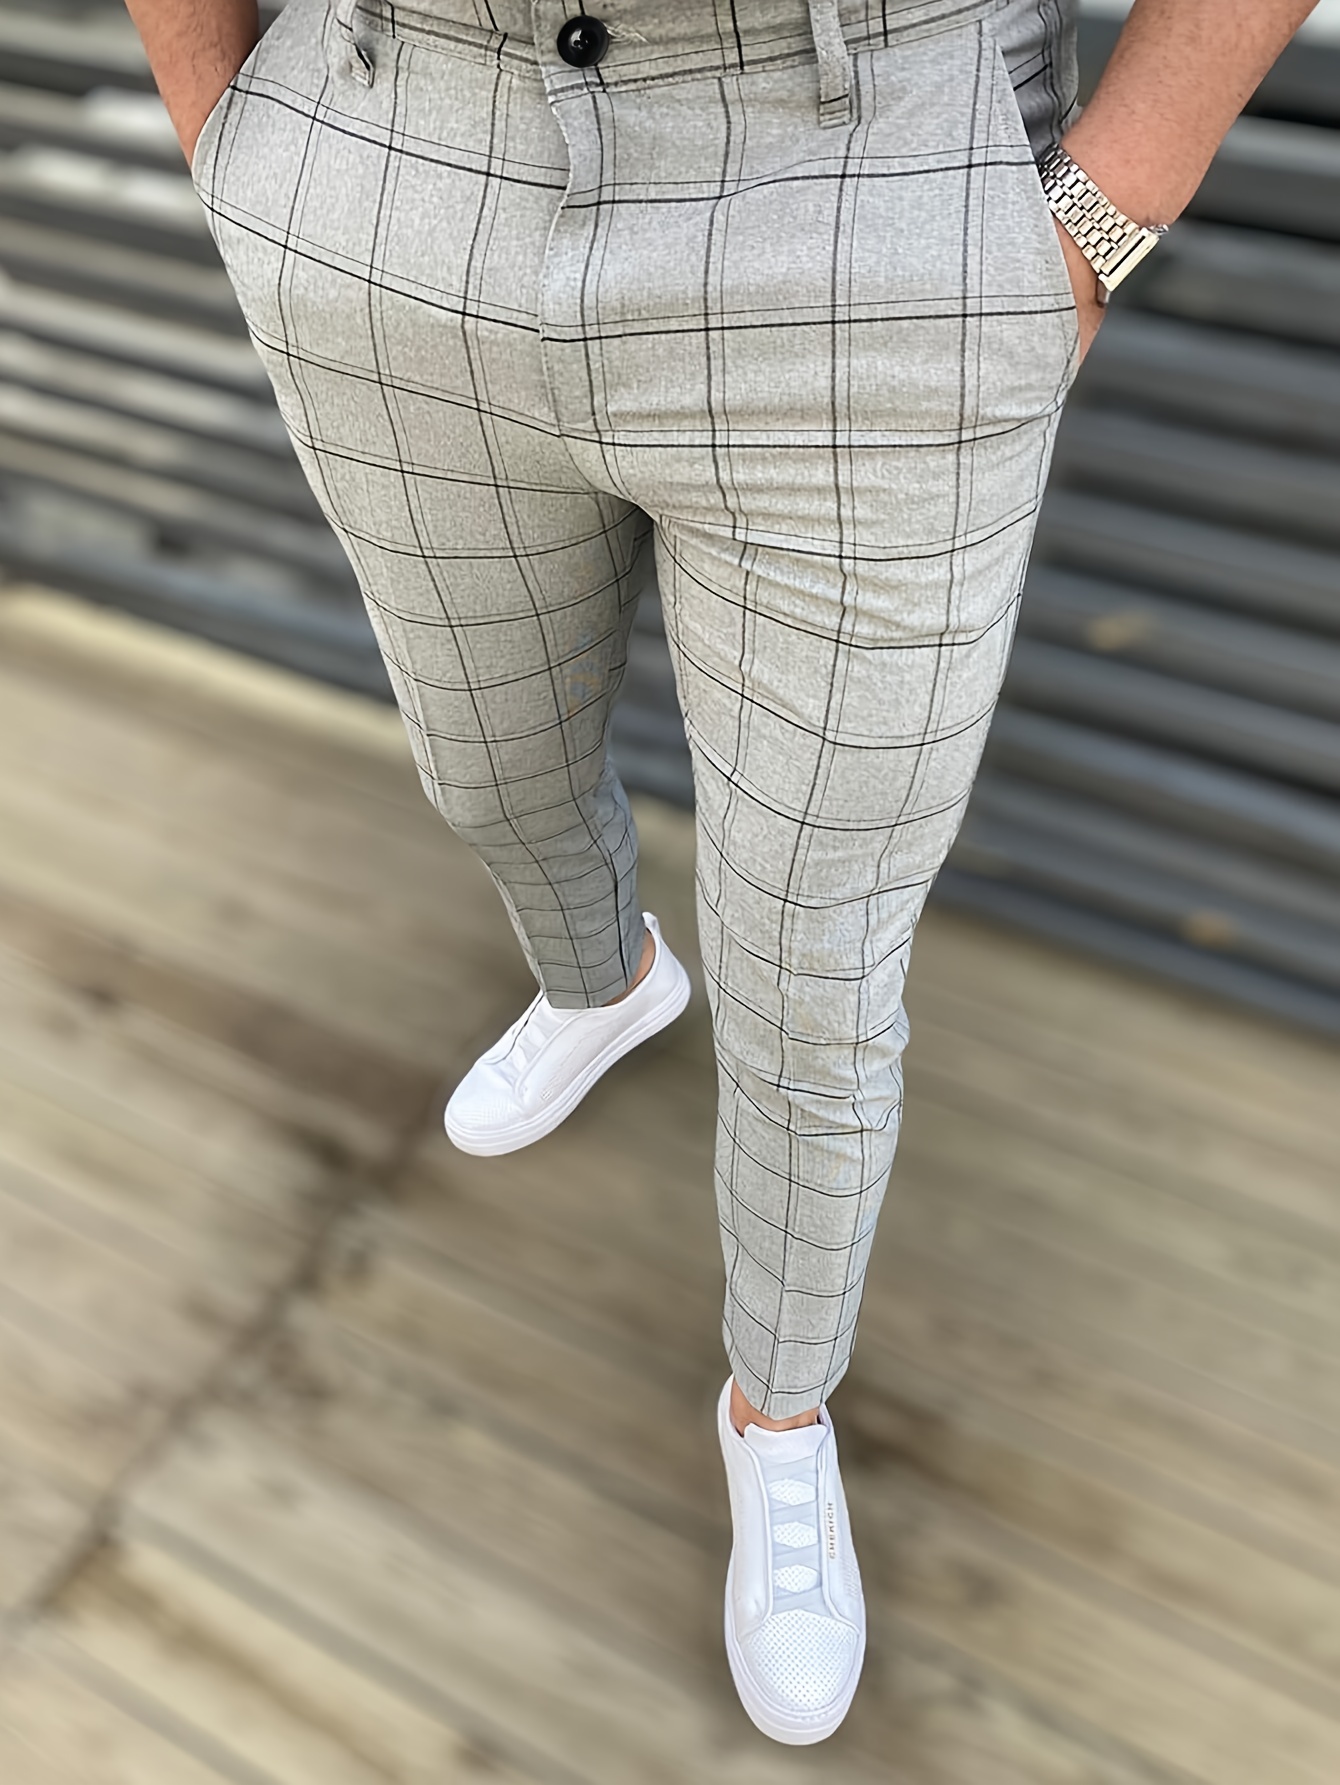 Can I Wear Plaid Pants To The Office?